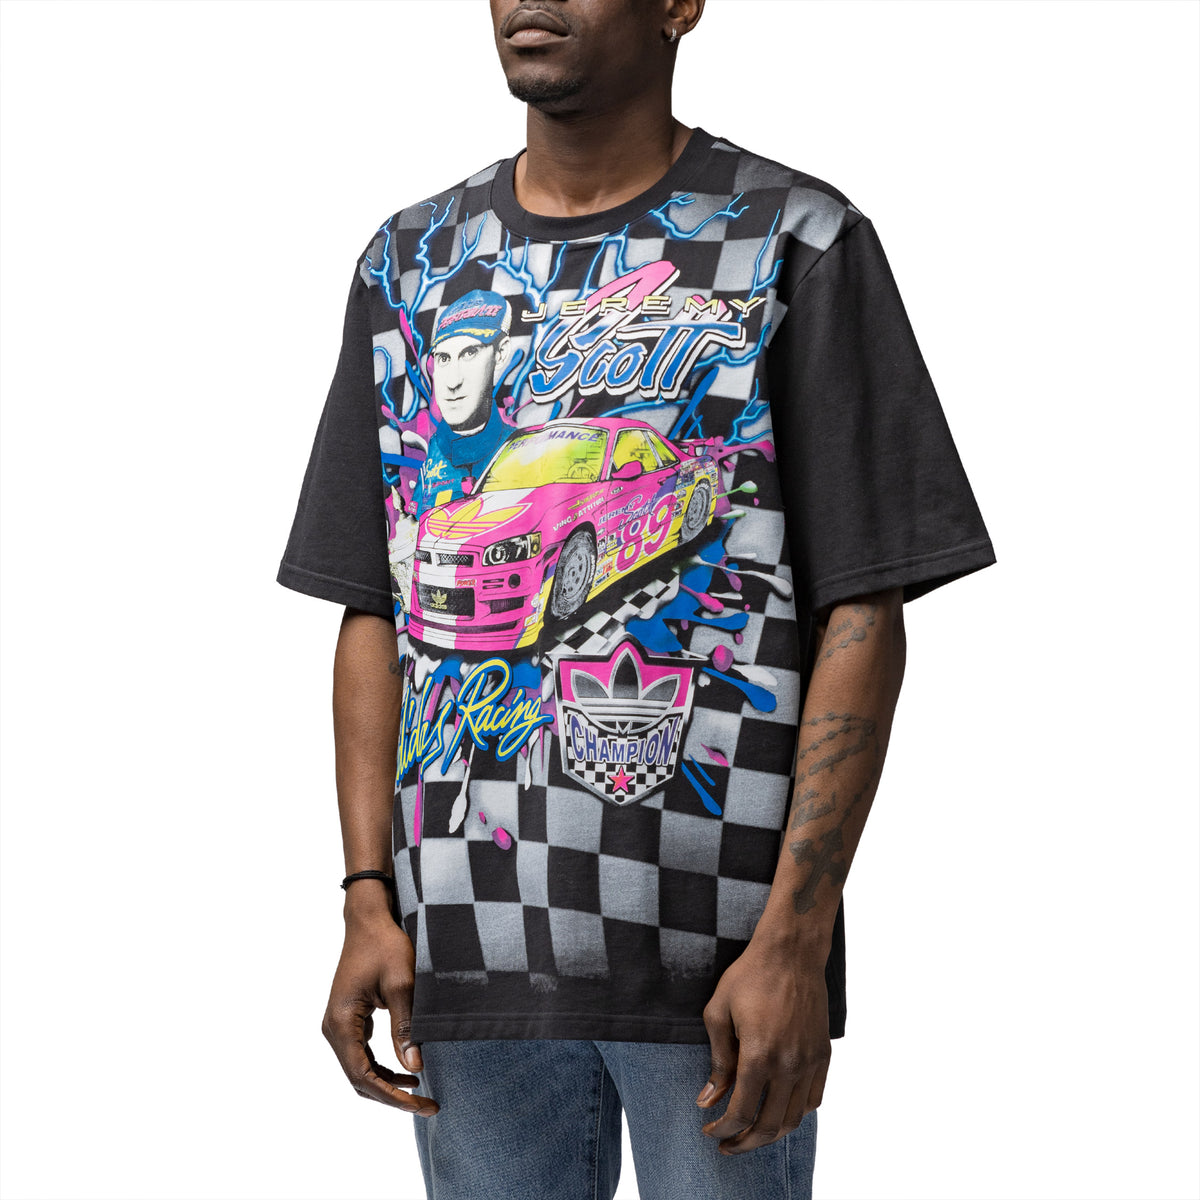 Adidas x Jeremy Scott Rally Tee – buy now at Asphaltgold Online Store!